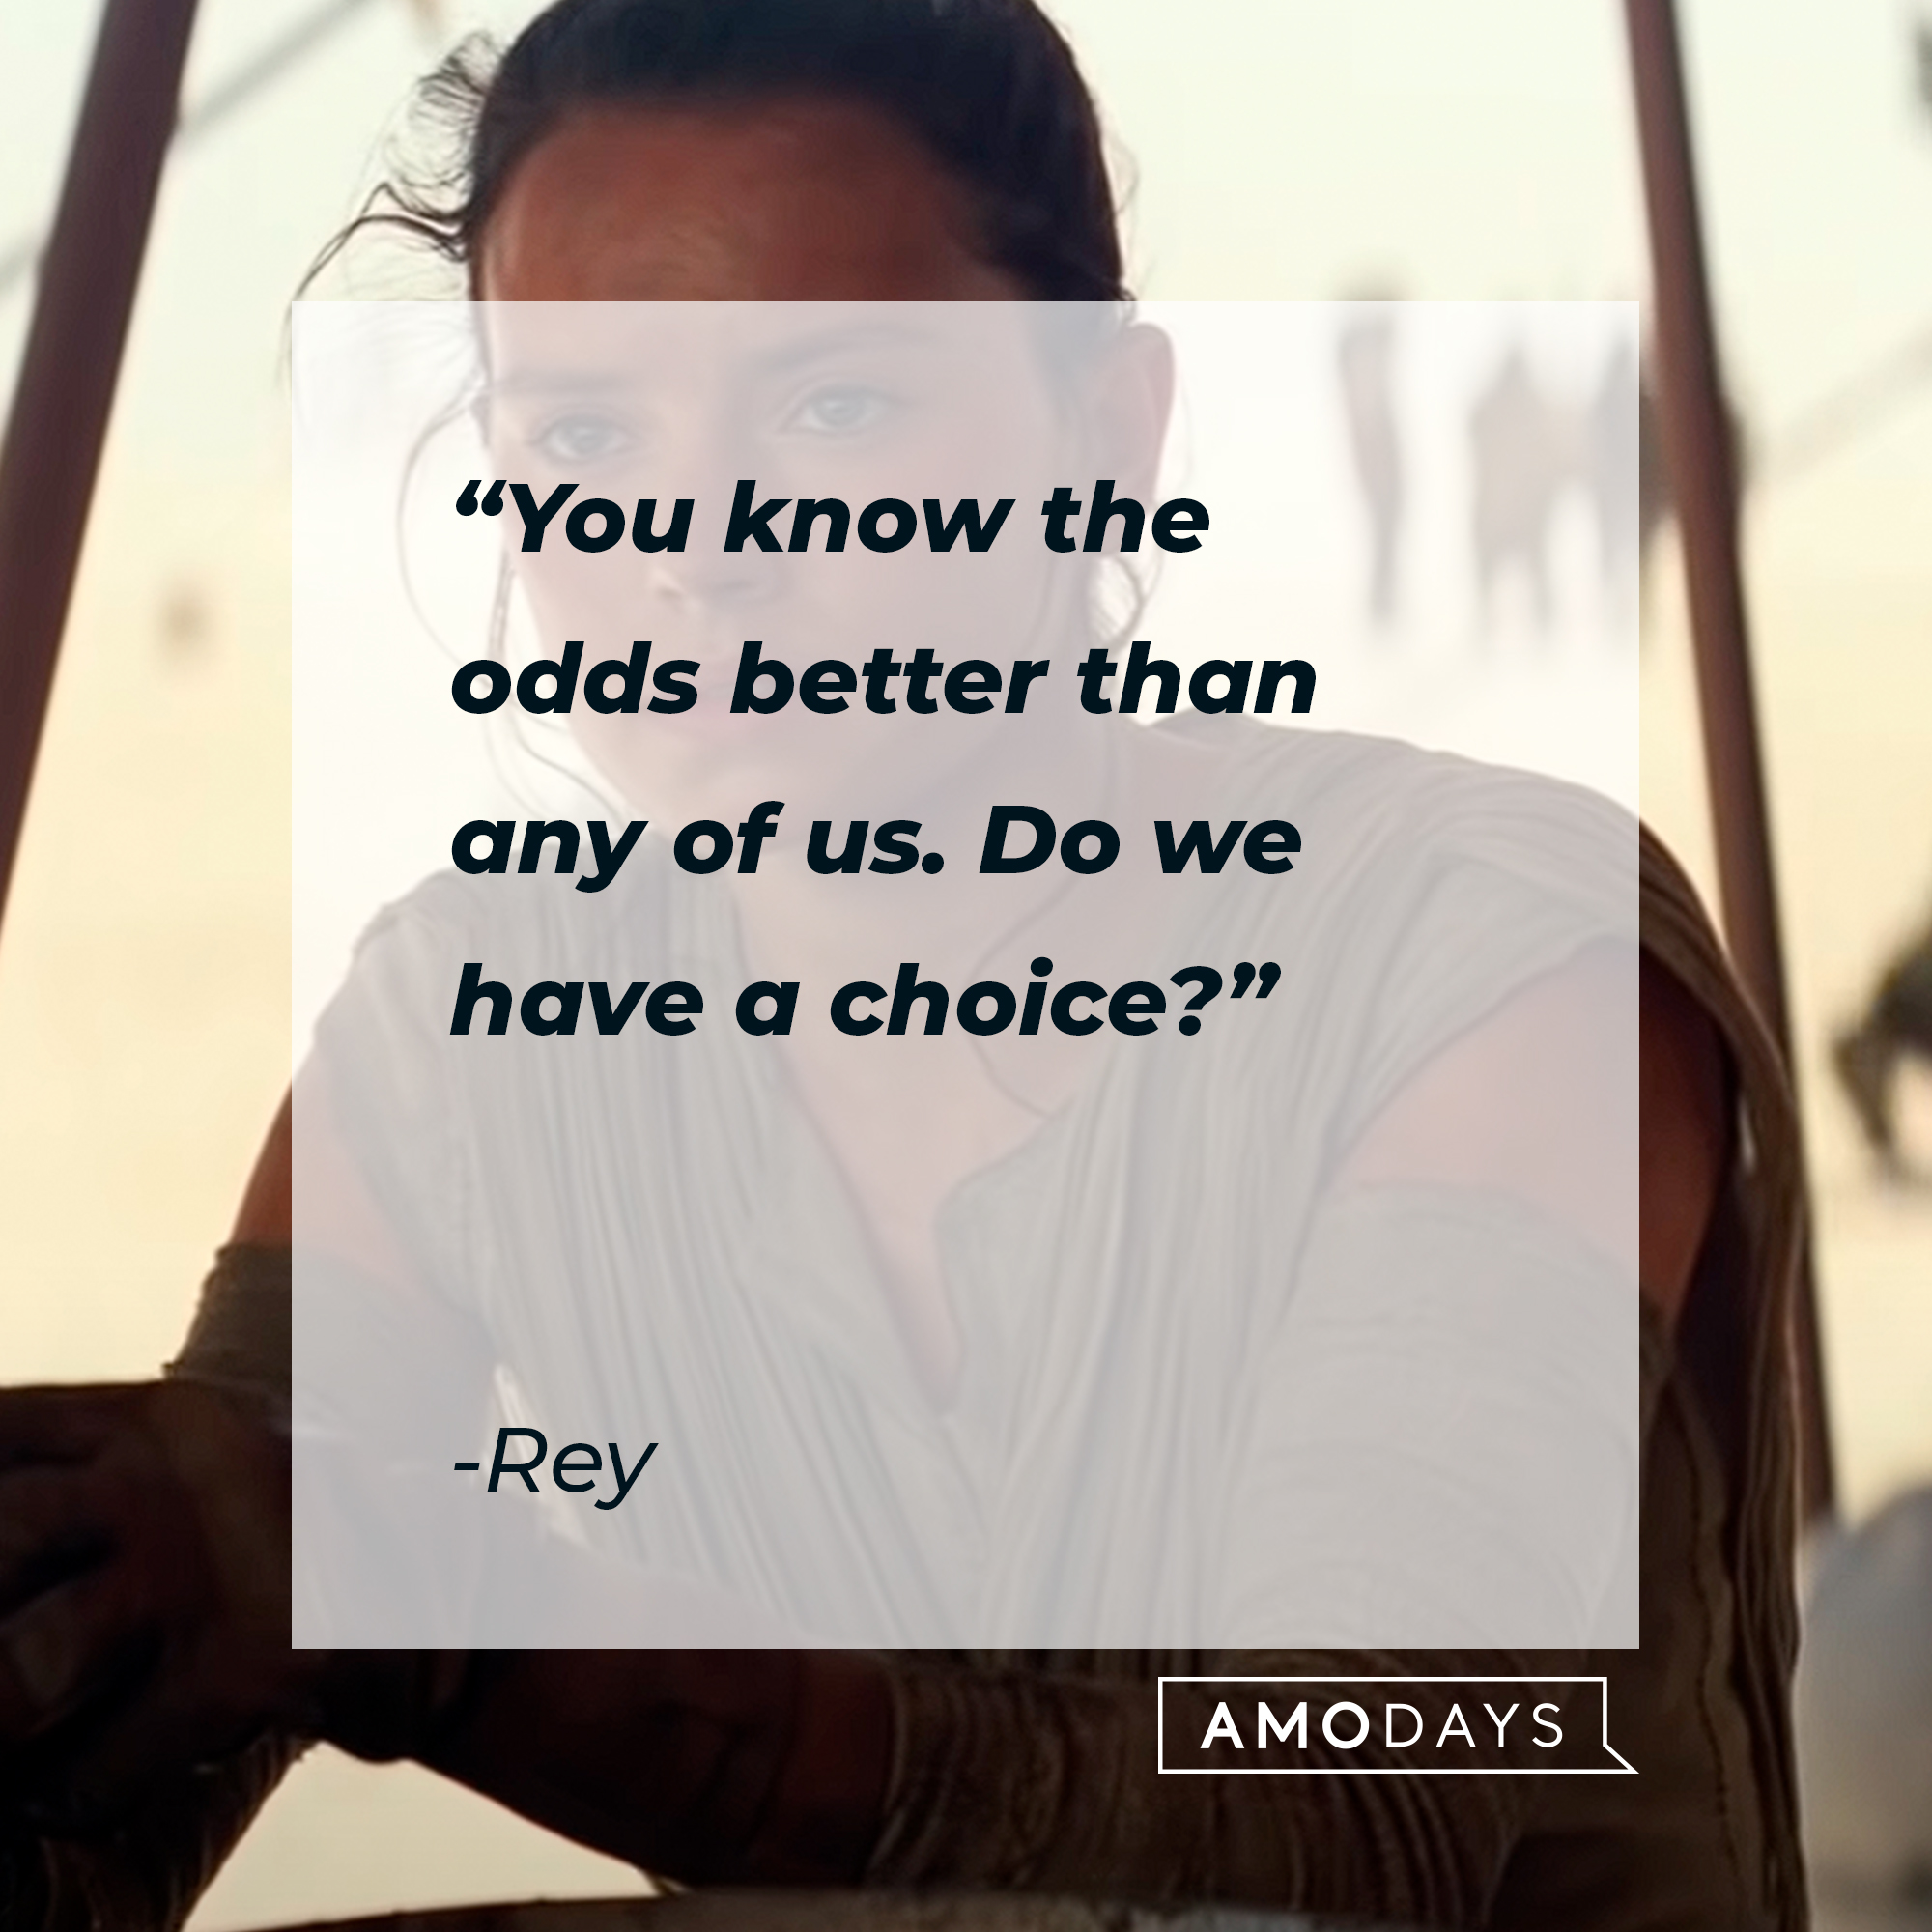 Rey's quote: "You know the odds better than any of us. Do we have a choice?"┃Source: youtube.com/StarWars